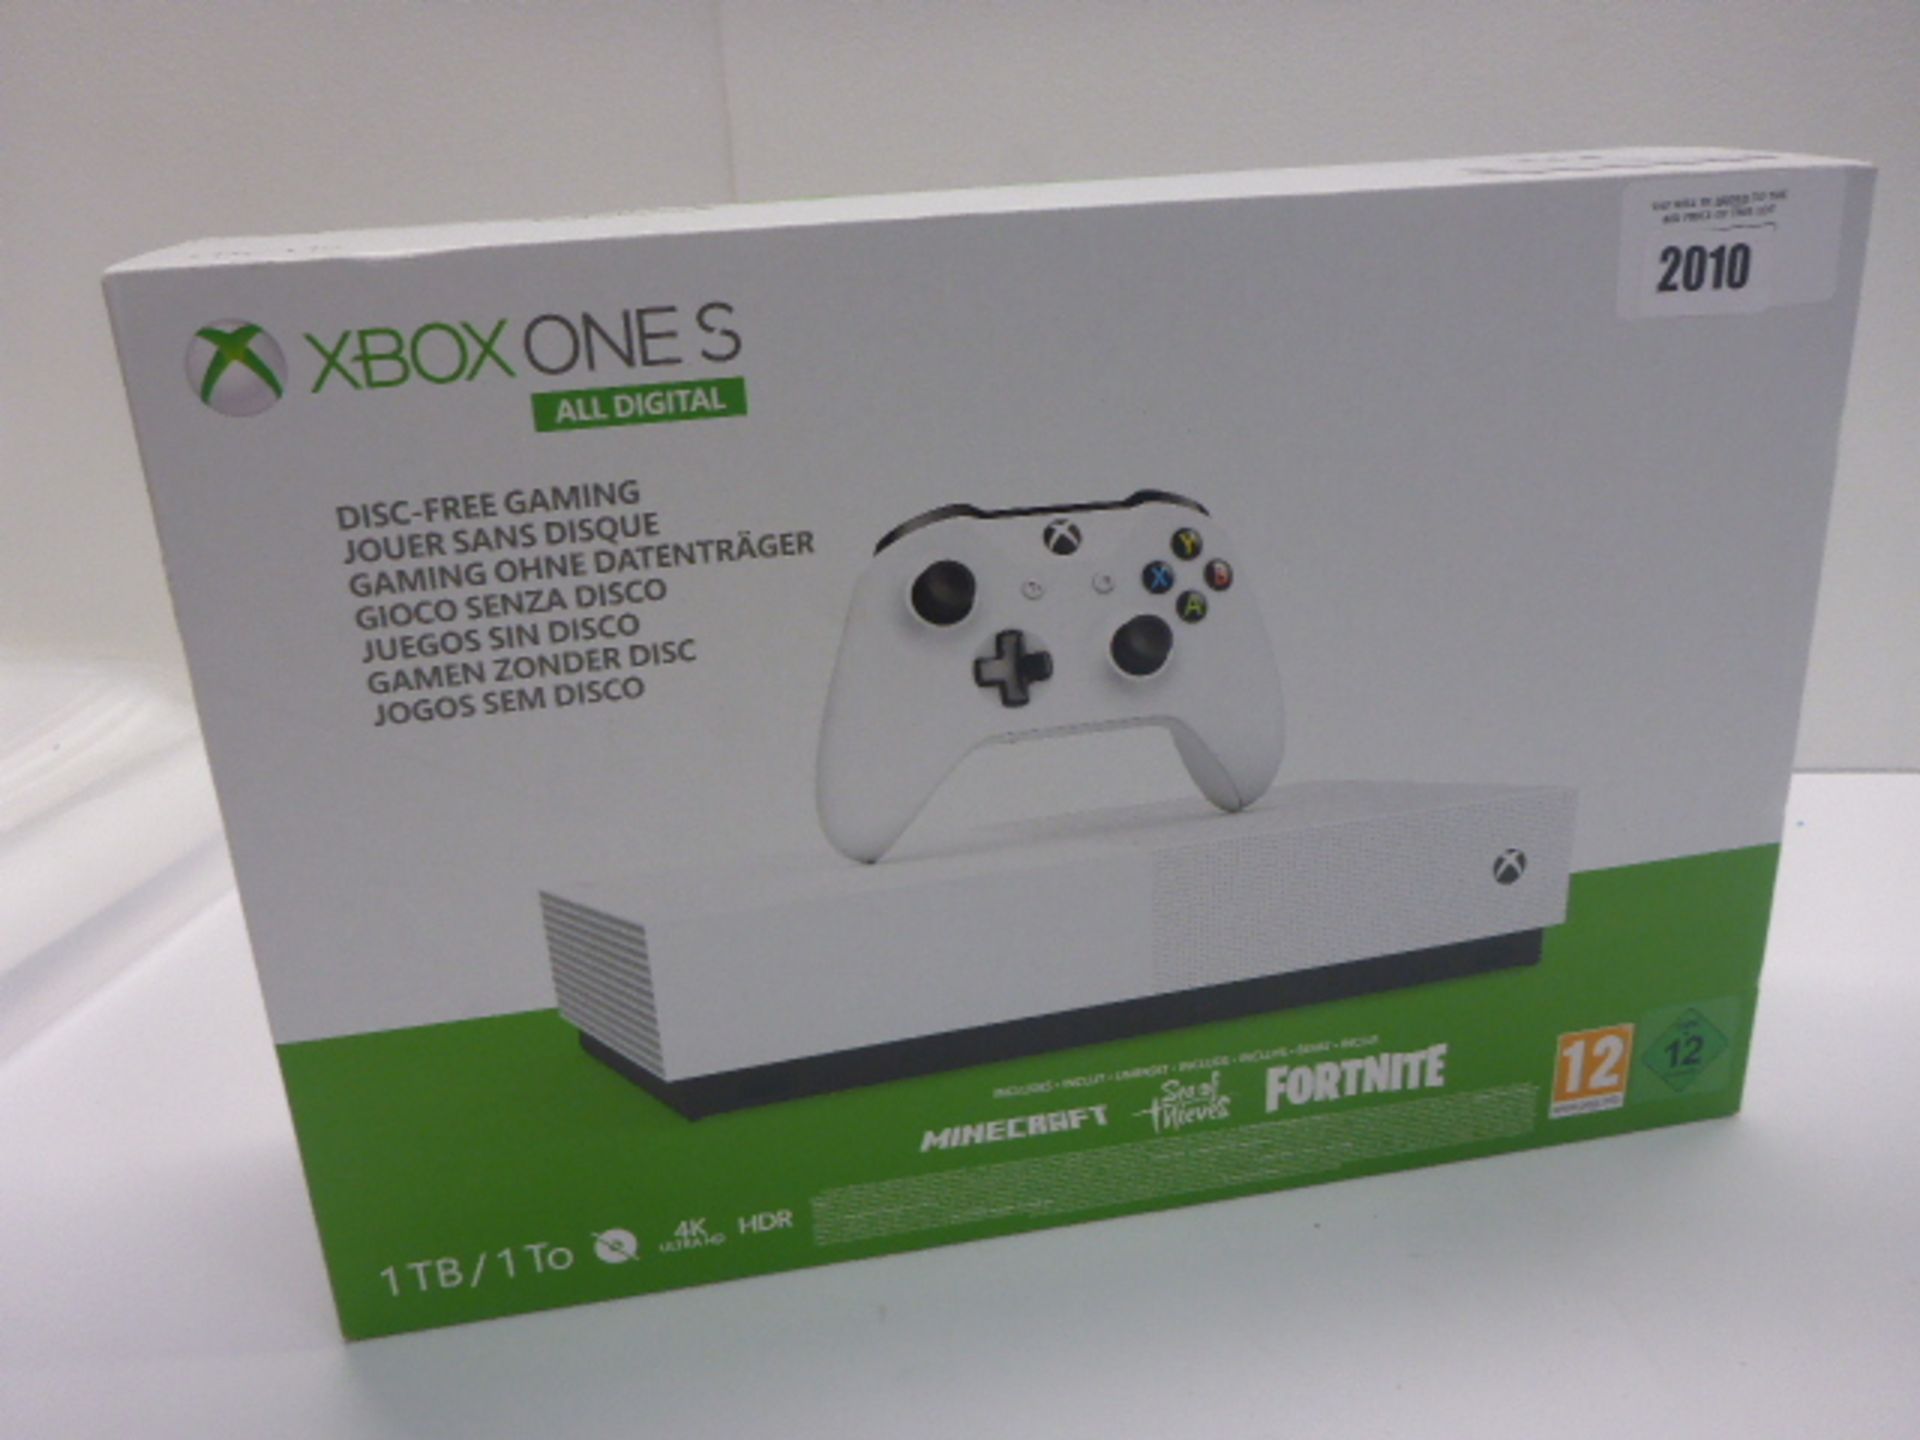 Xbox one S, all digital 1TB edition, boxed and sealed.